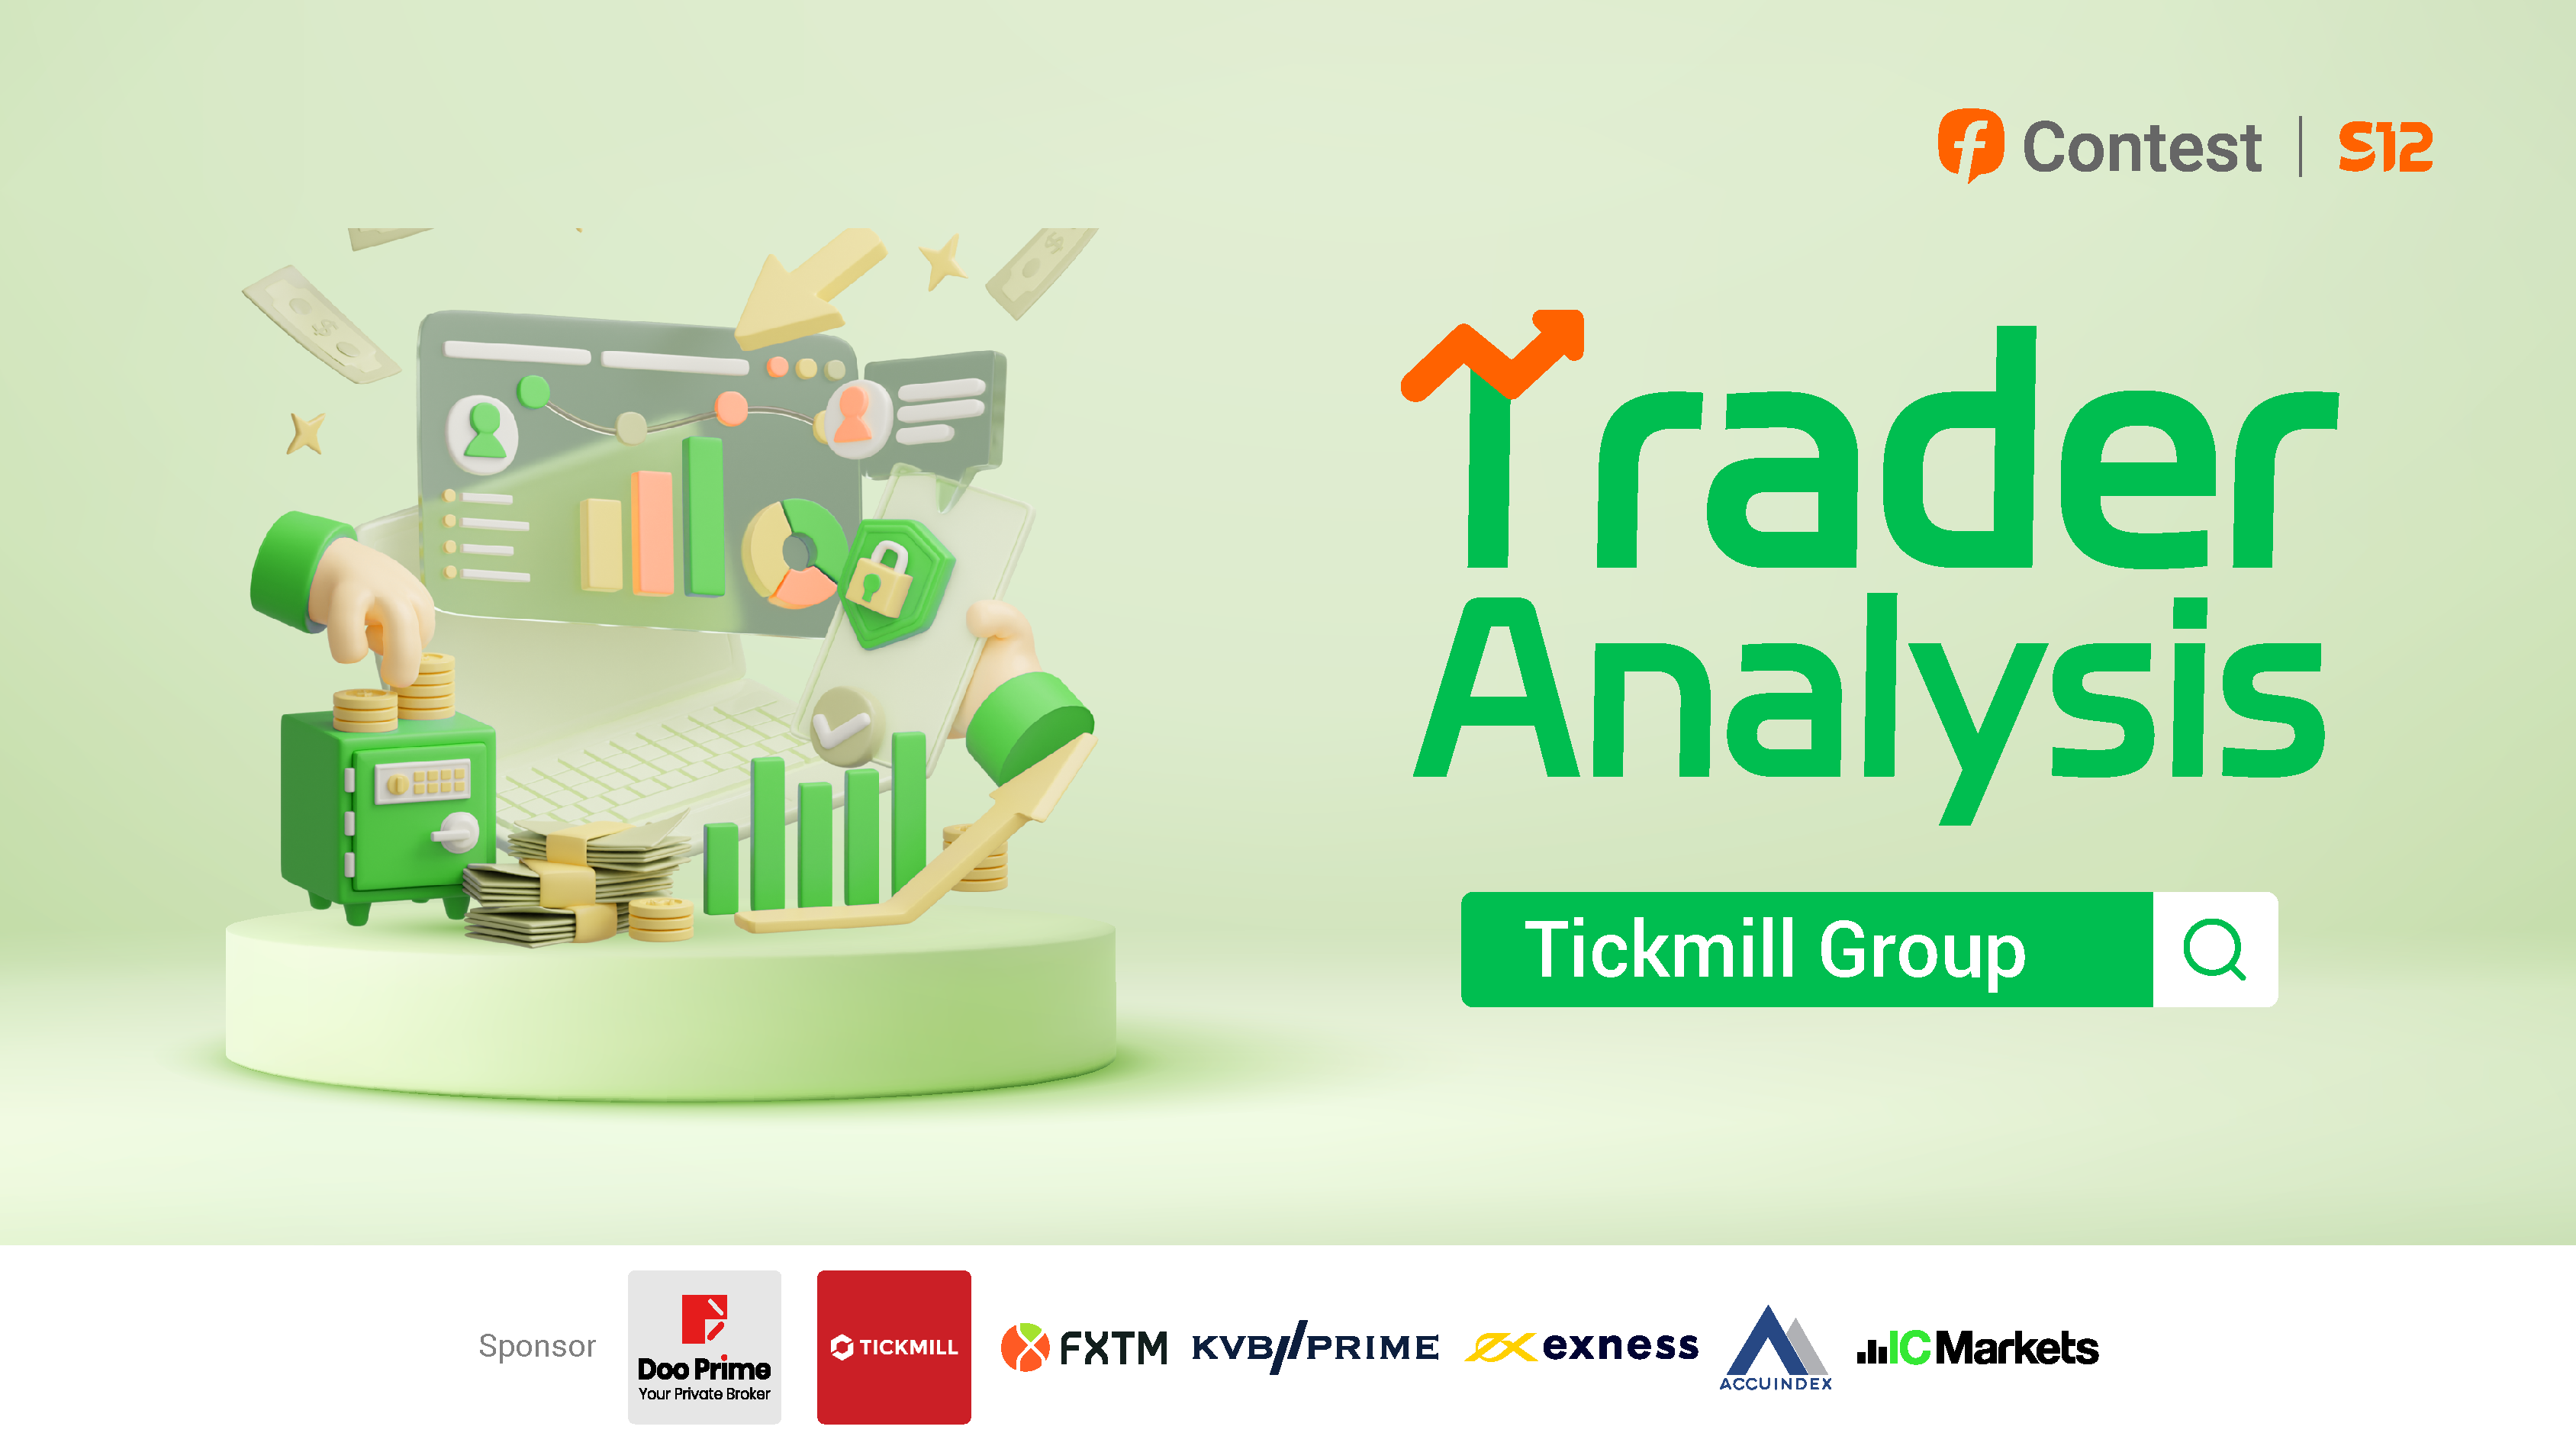 Nearly 40% of the participating users in the Tickmill group made profits!